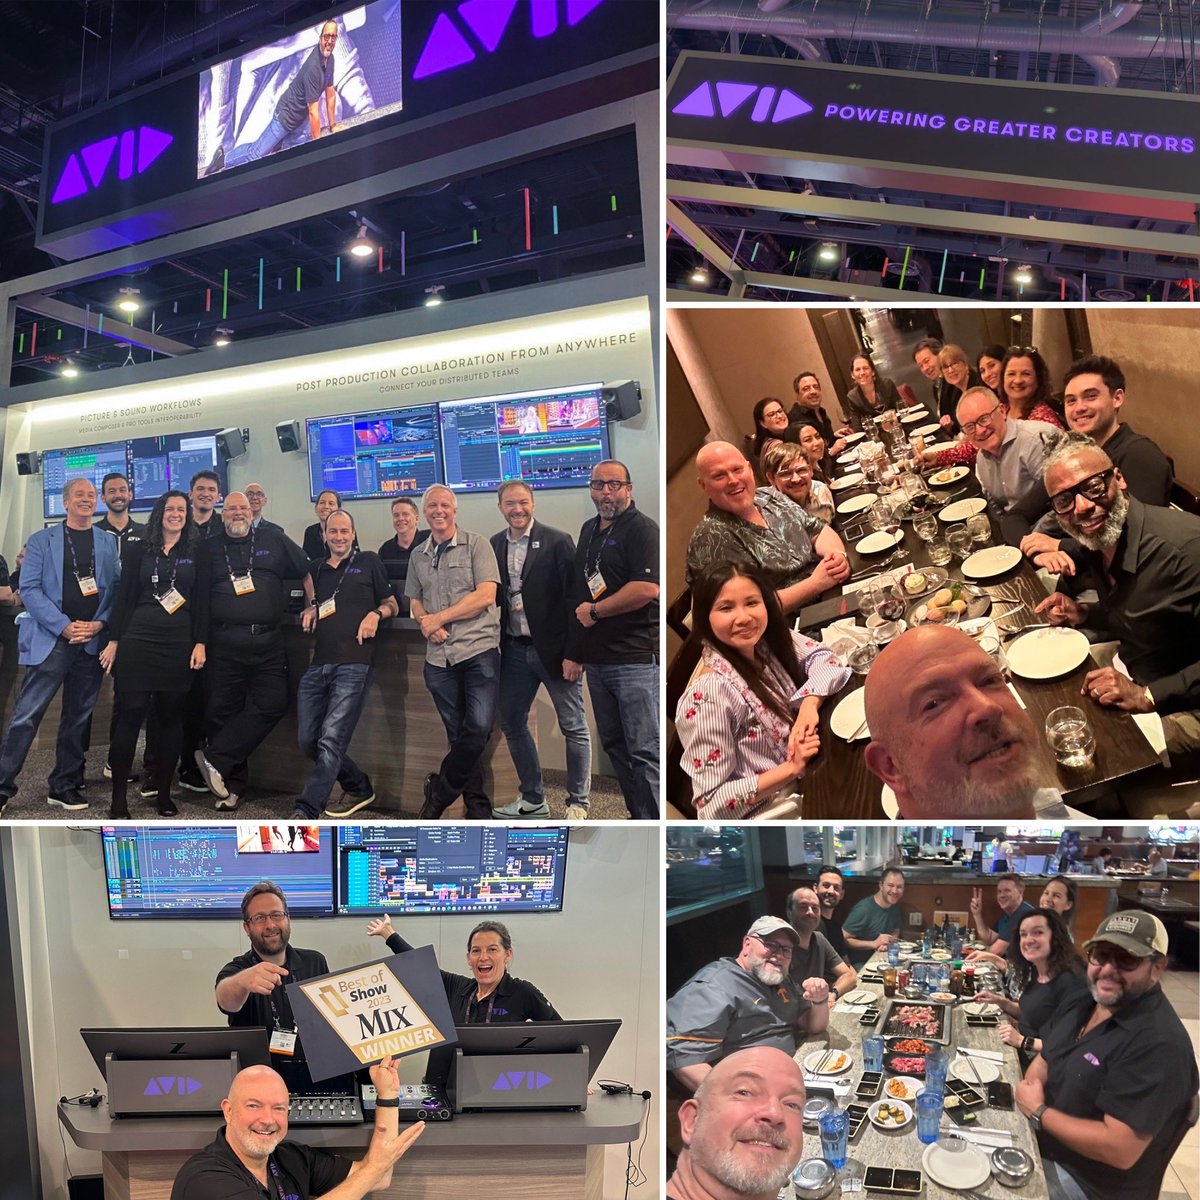 NAB 2023 has wrapped and it was great to SEE friends and work colleagues from @Avid and @ACEFilmEditors as well as our resellers and partners, as well as presenting some of the new enhancements with @MediaComposer. Thank you all for a fantastic show! #NAB2023